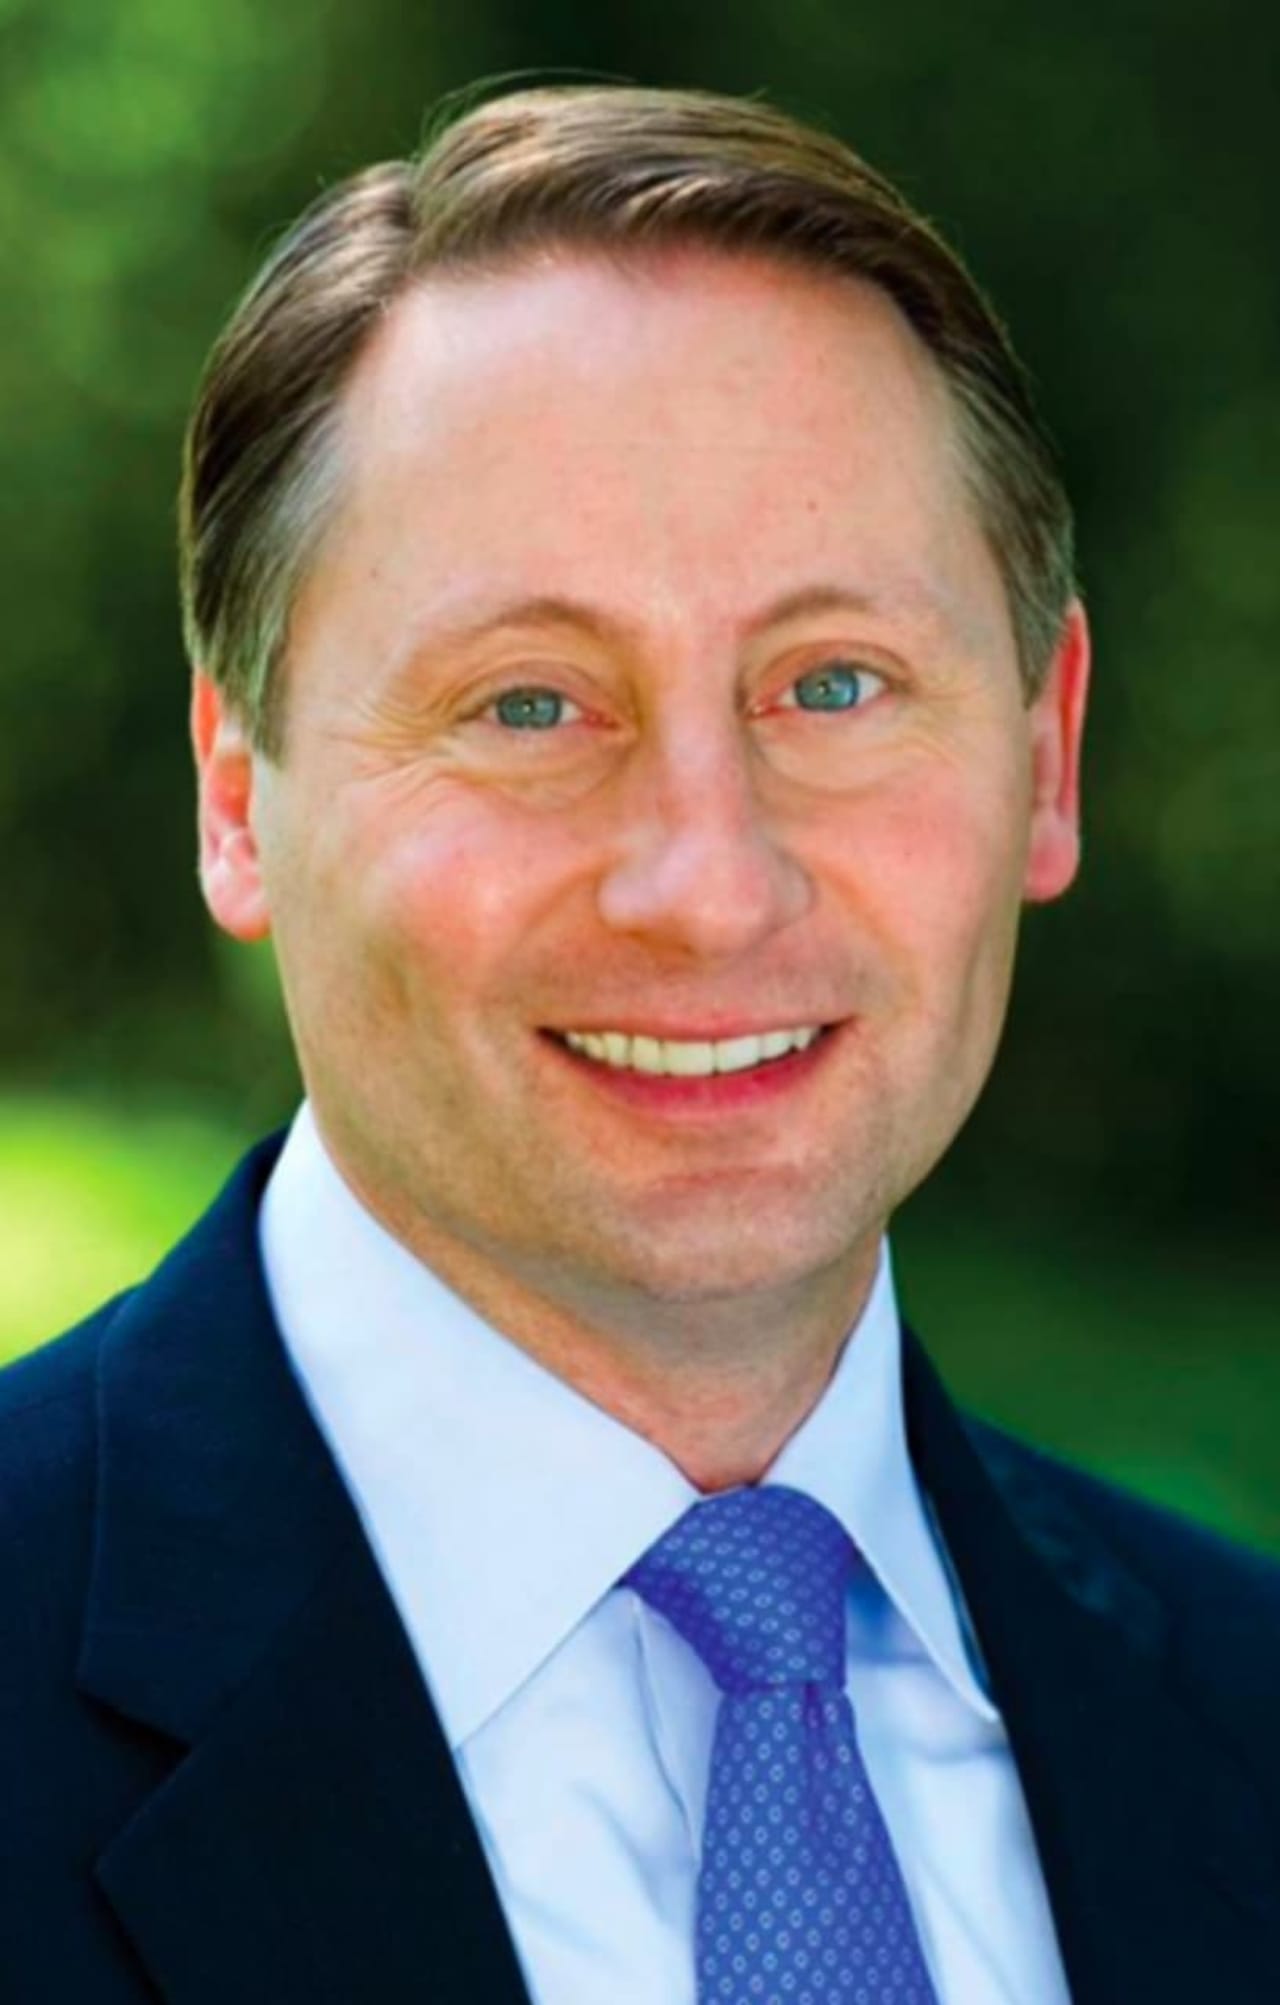 Westchester County Executive Rob Astorino will take part in the second Connections for Success Conference on March 22 in Tarrytown.